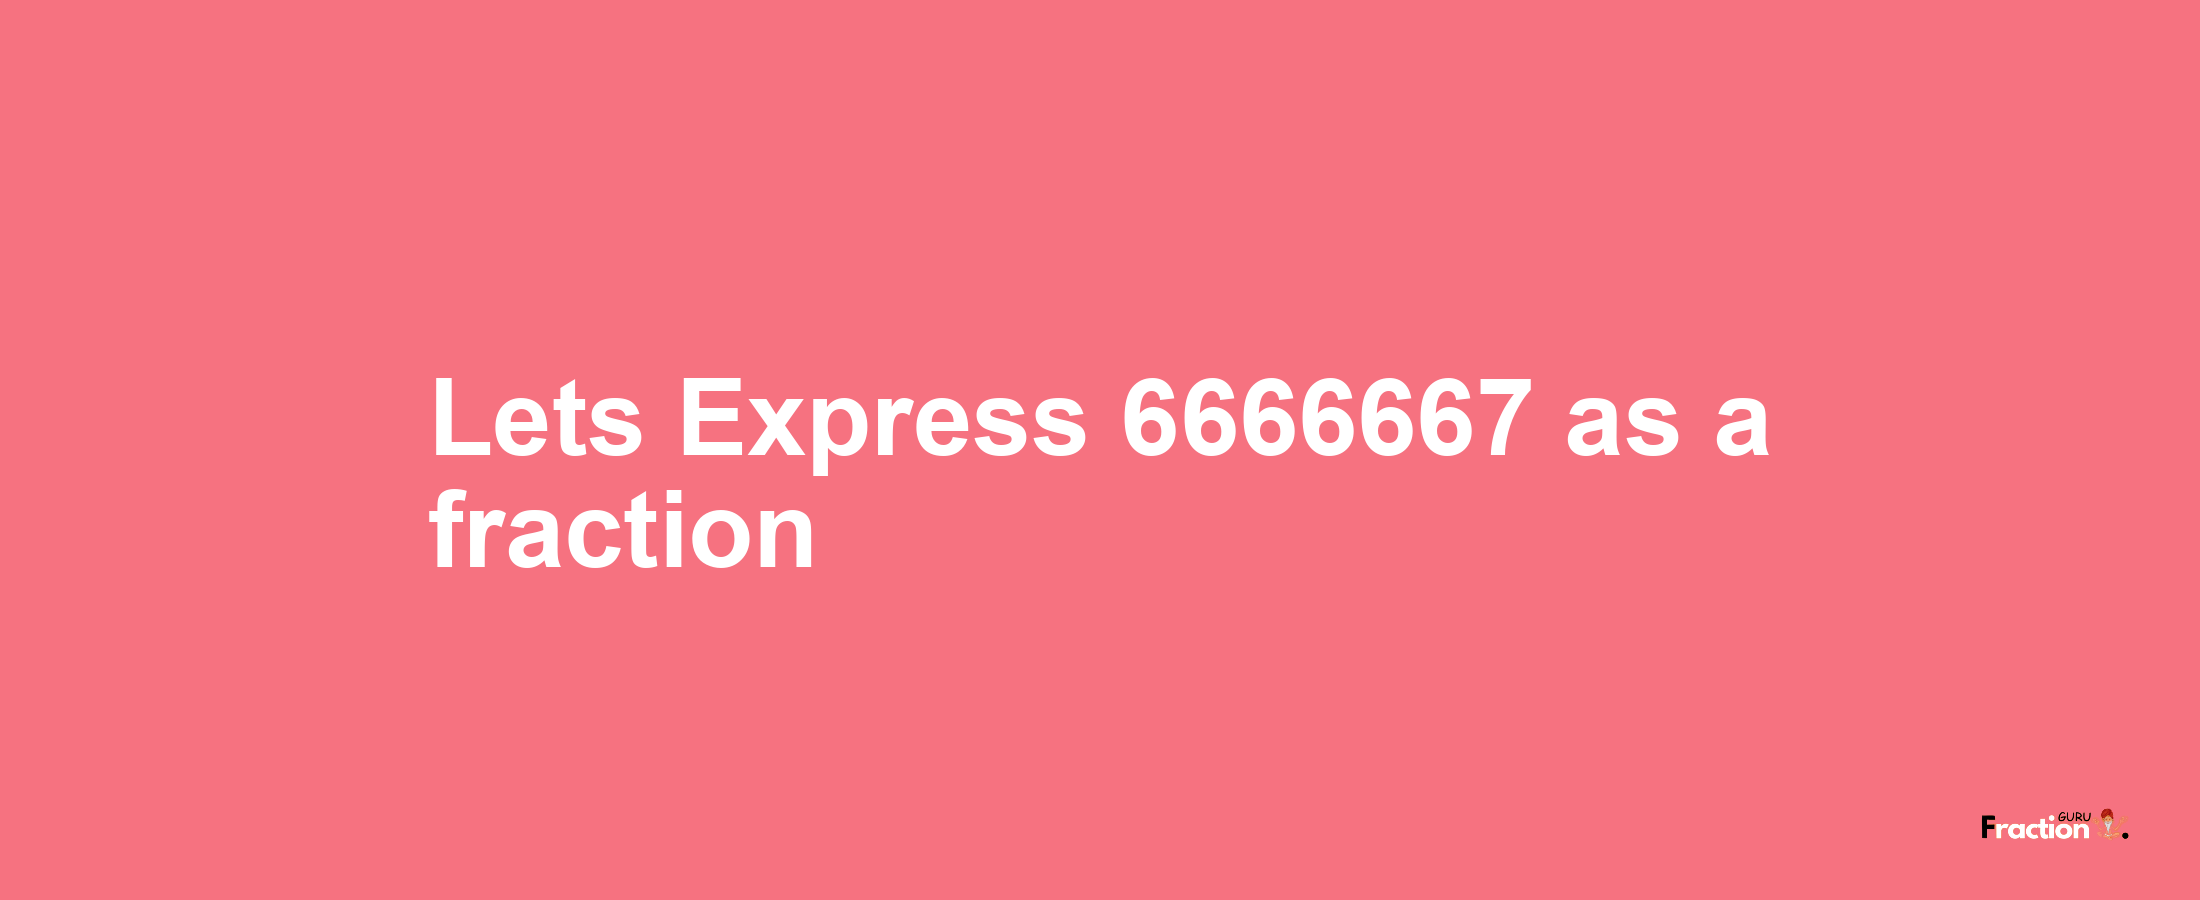 Lets Express 6666667 as afraction